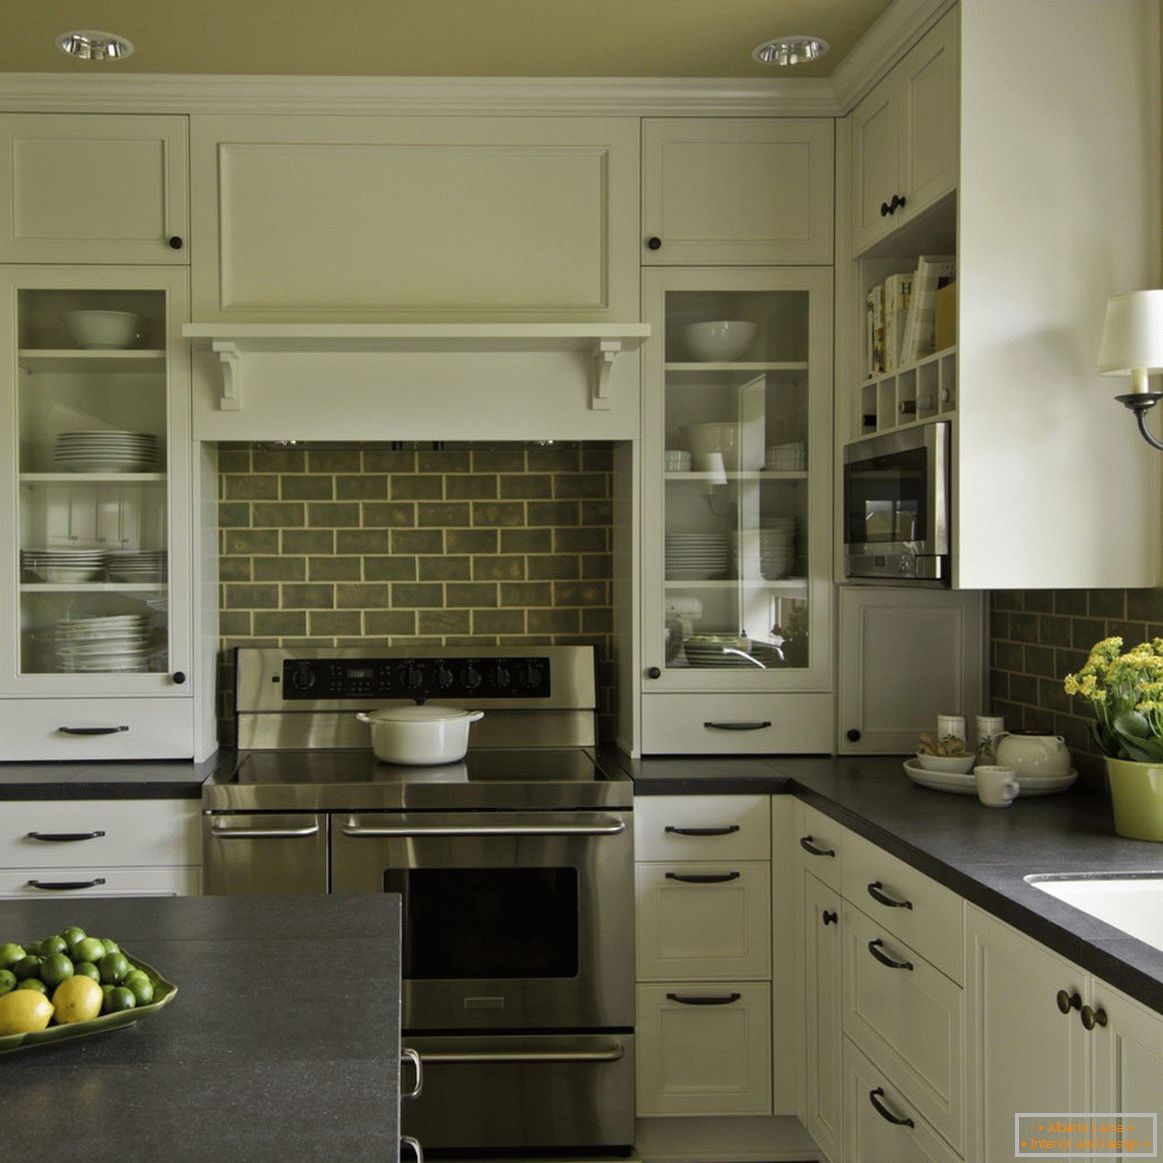 Kitchen with a ceiling in olive color